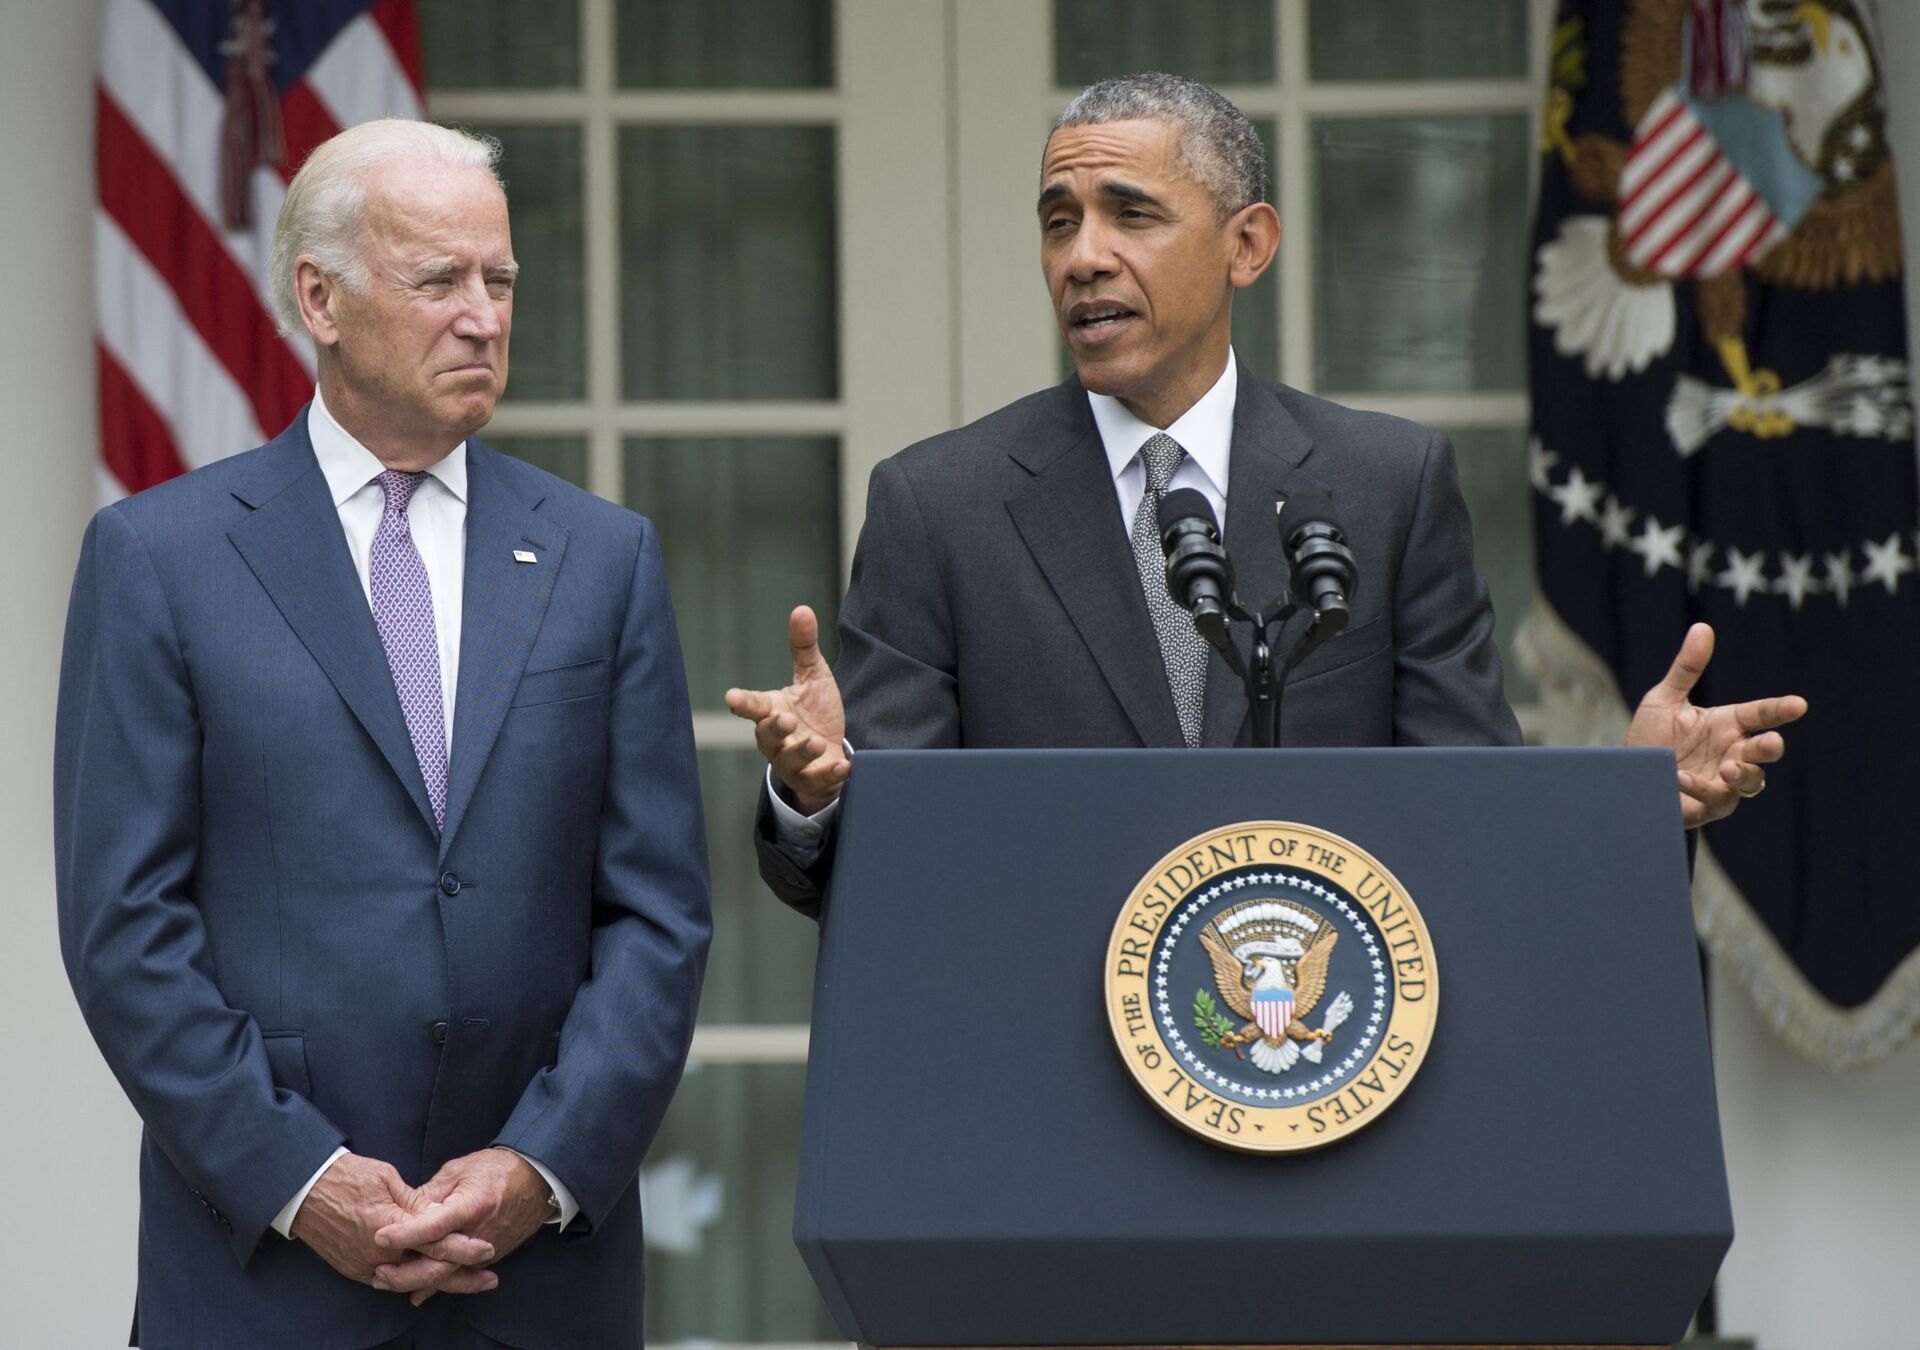 US President Barack Obama speaks alongside US Vice President Joe Biden about the Supreme Court's ruling to uphold the subsidies that comprise the Affordable Care Act, known as Obamacare, in the Rose Garden of the White House in Washington, DC, June 25, 2015 - Sputnik International, 1920, 08.09.2021